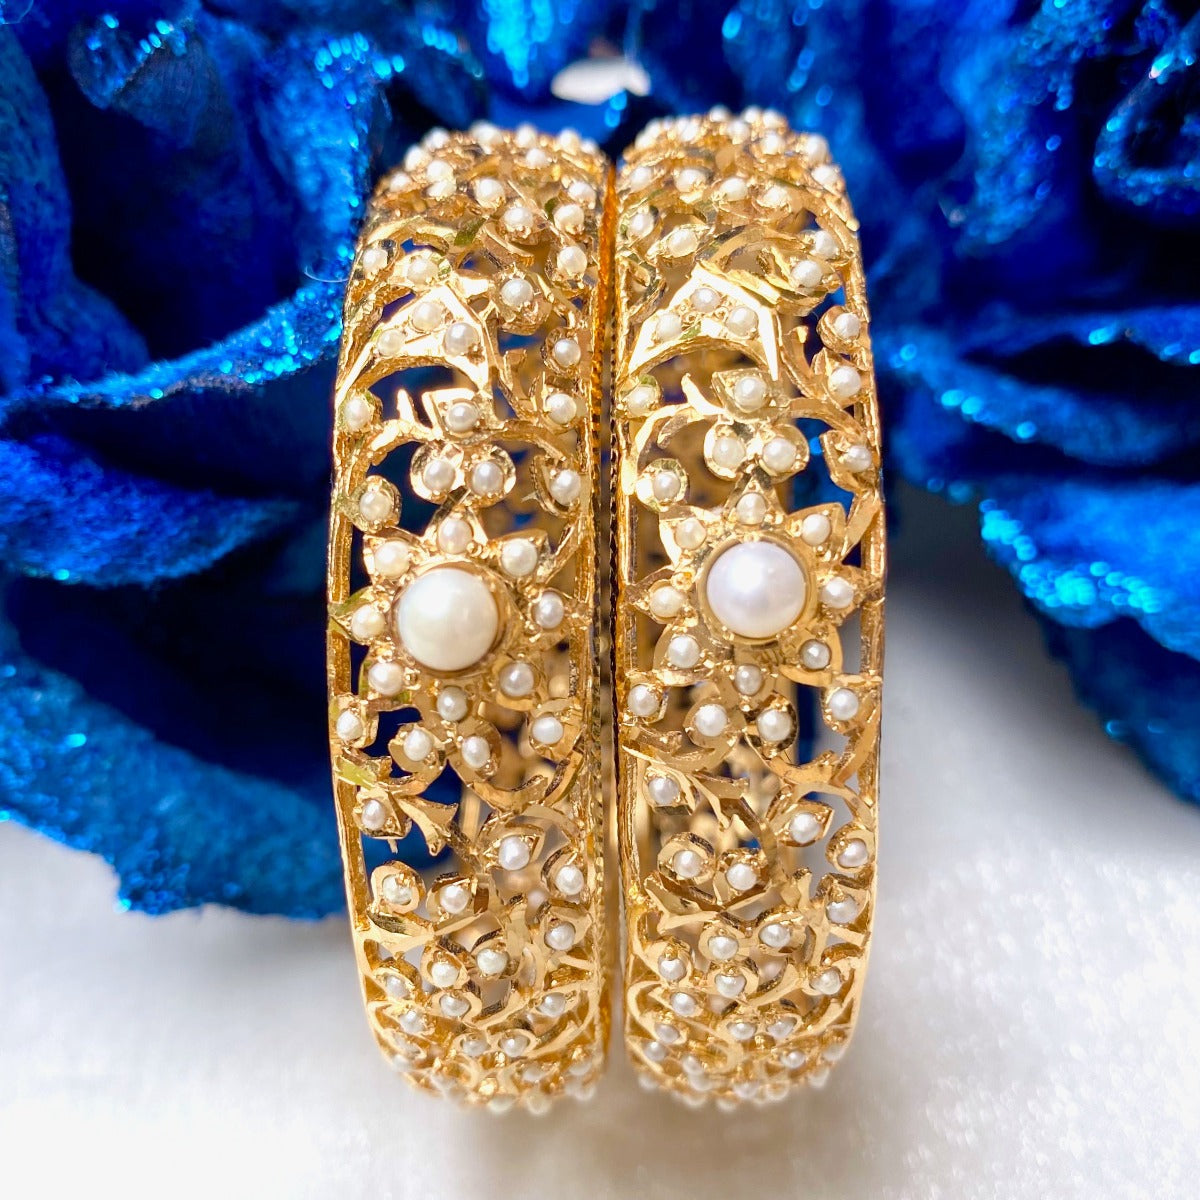 fashion jewelry bangles studded with pearls